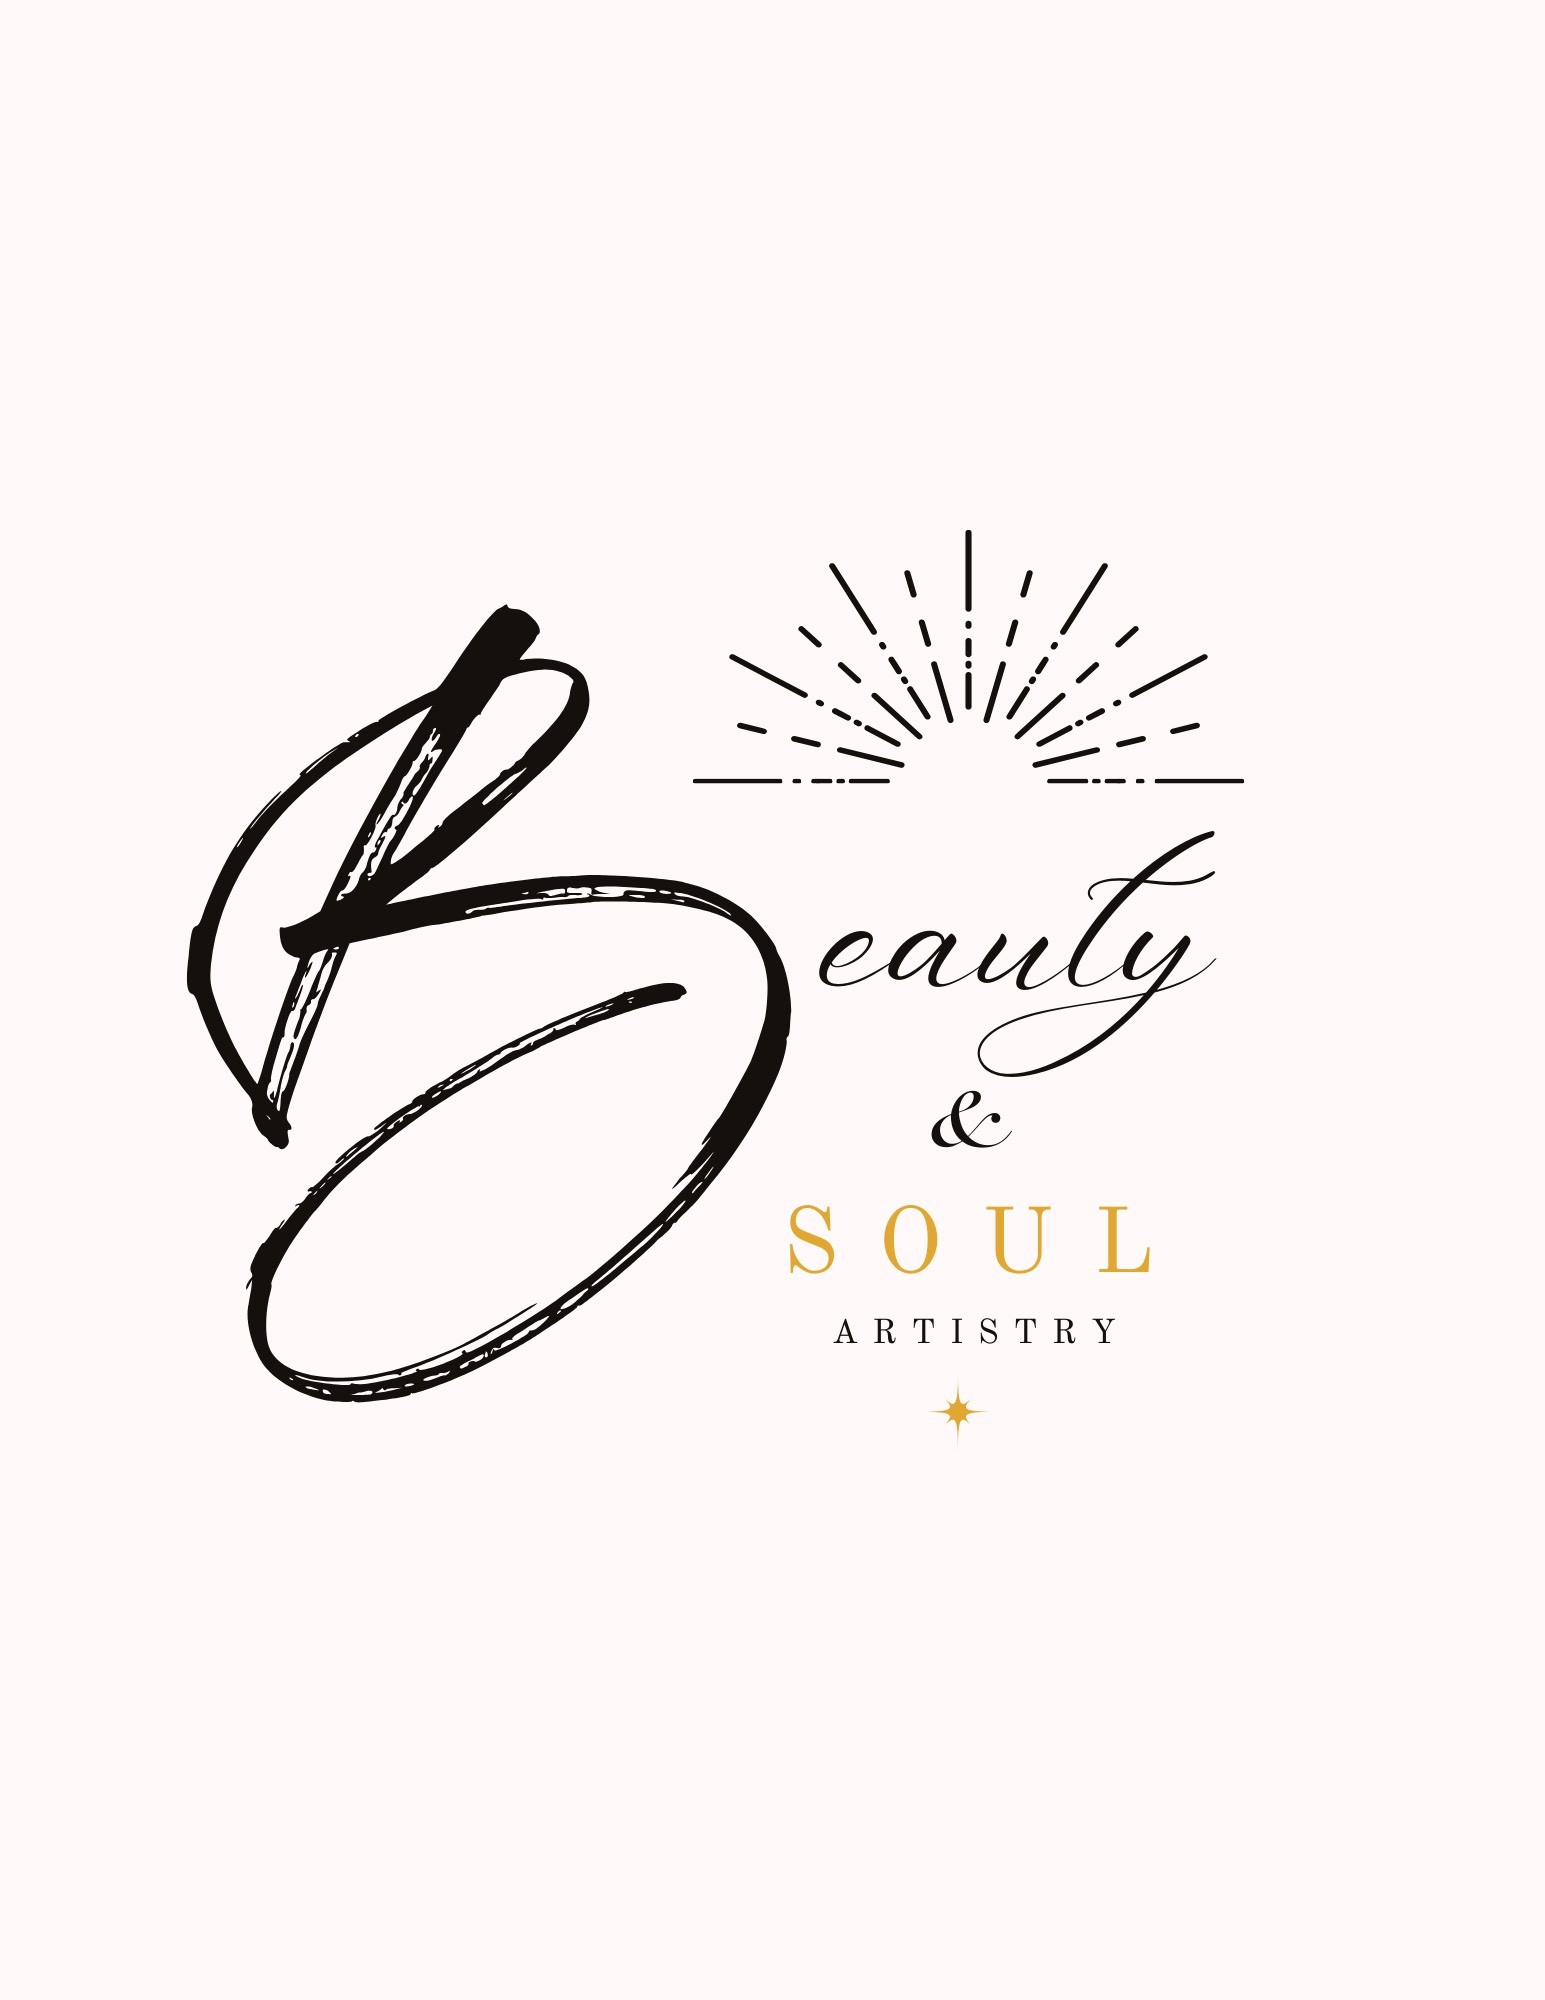 Beauty and Soul Artistry Inc.